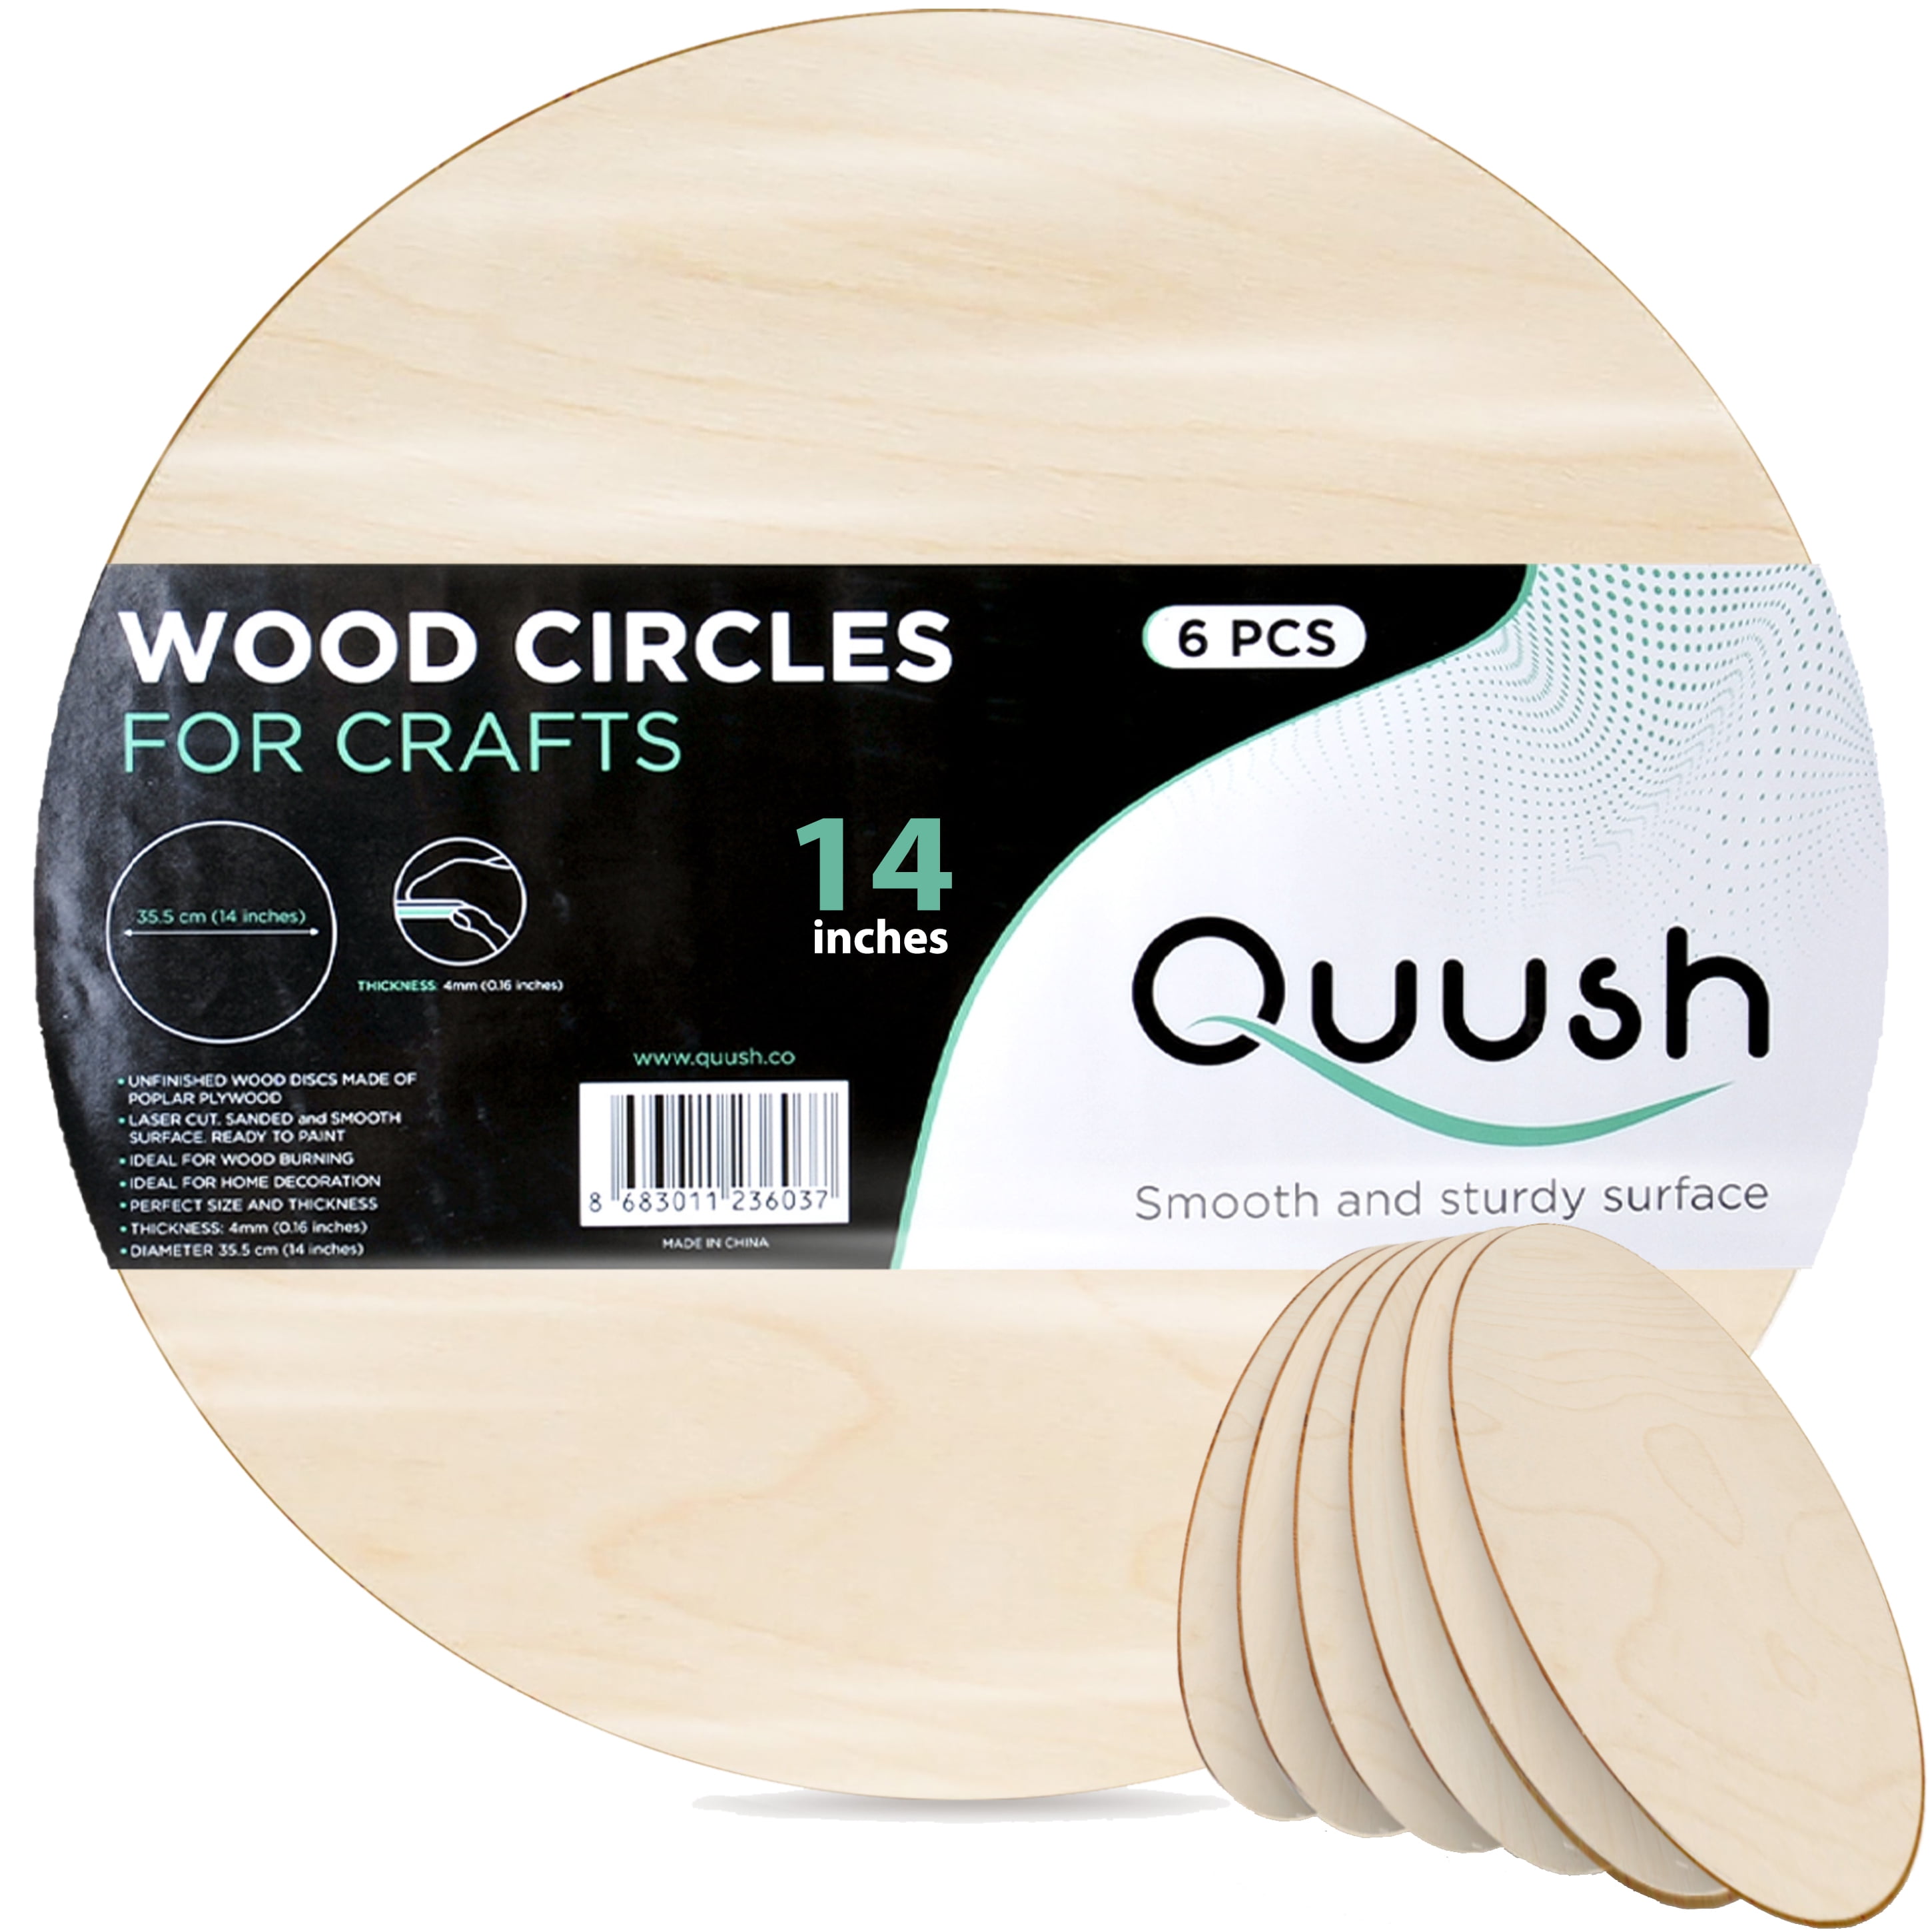 pojah 5Pcs 14 Inch Wood Circles for Crafts, Unfinished Blank Wooden Rounds  Slice Wooden Cutouts for DIY Crafts, Door Hanger, Sign, Woo